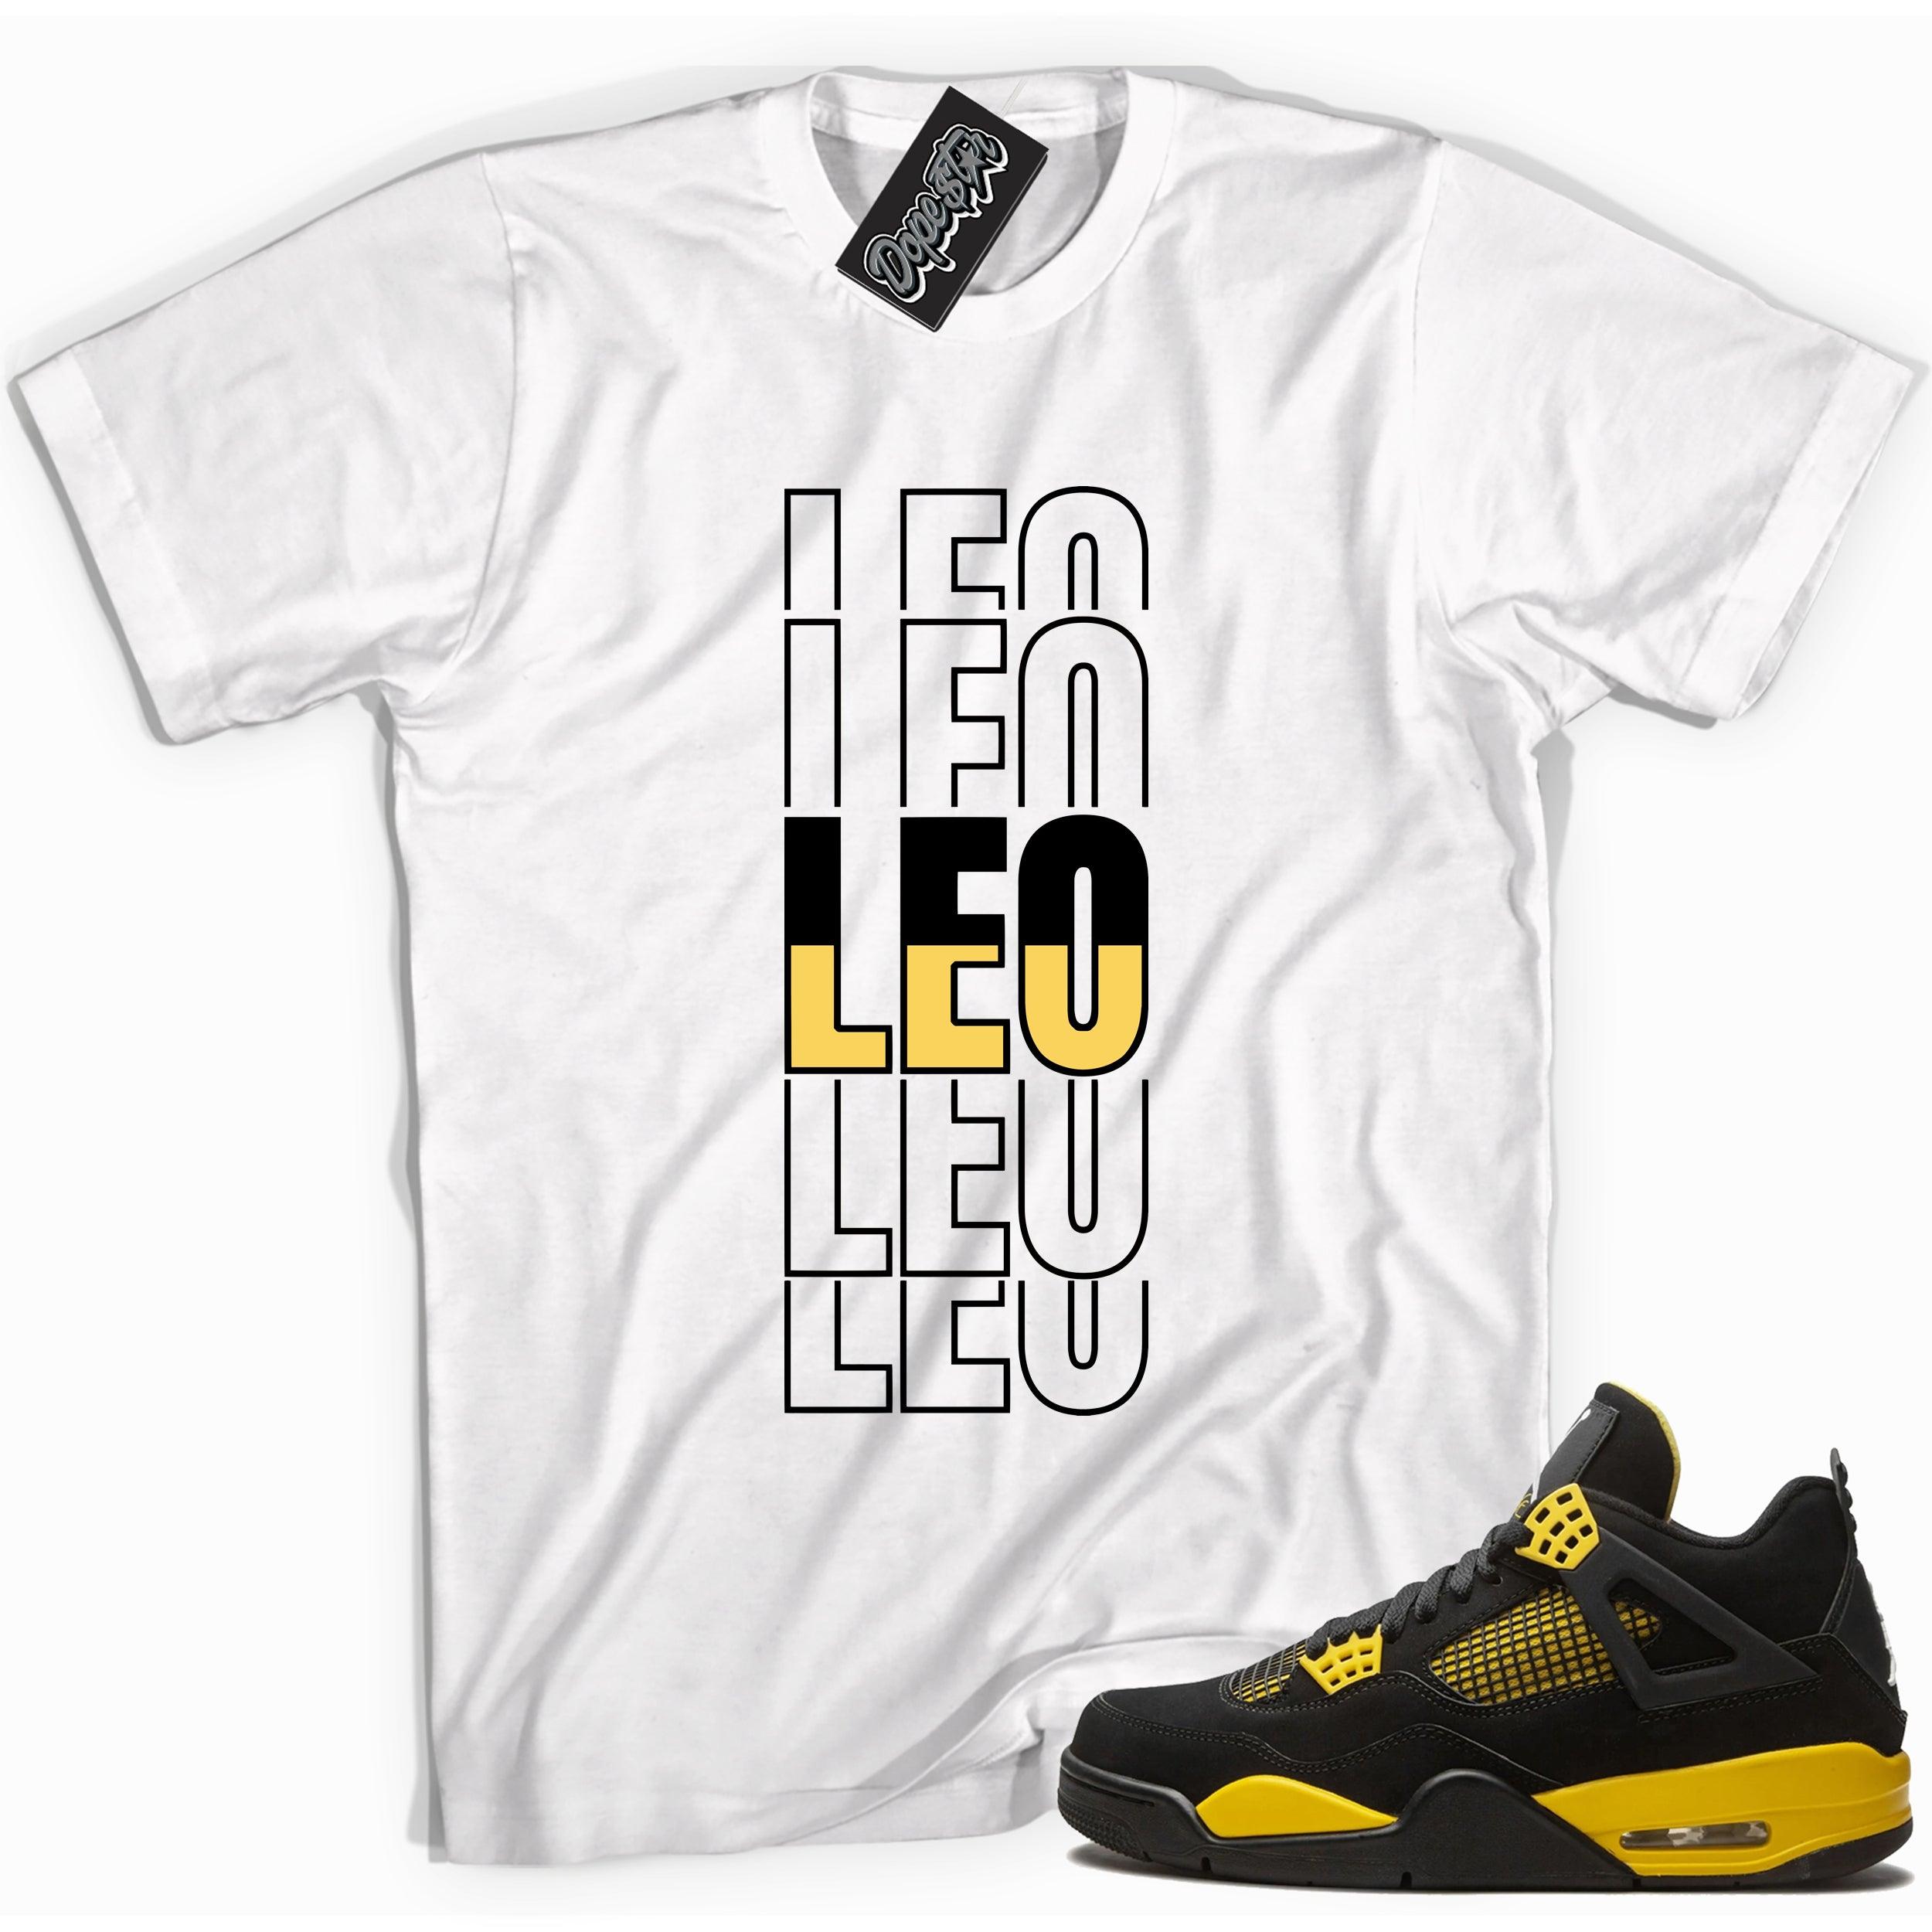 Cool white graphic tee with 'leo' print, that perfectly matches Air Jordan 4 Thunder sneakers